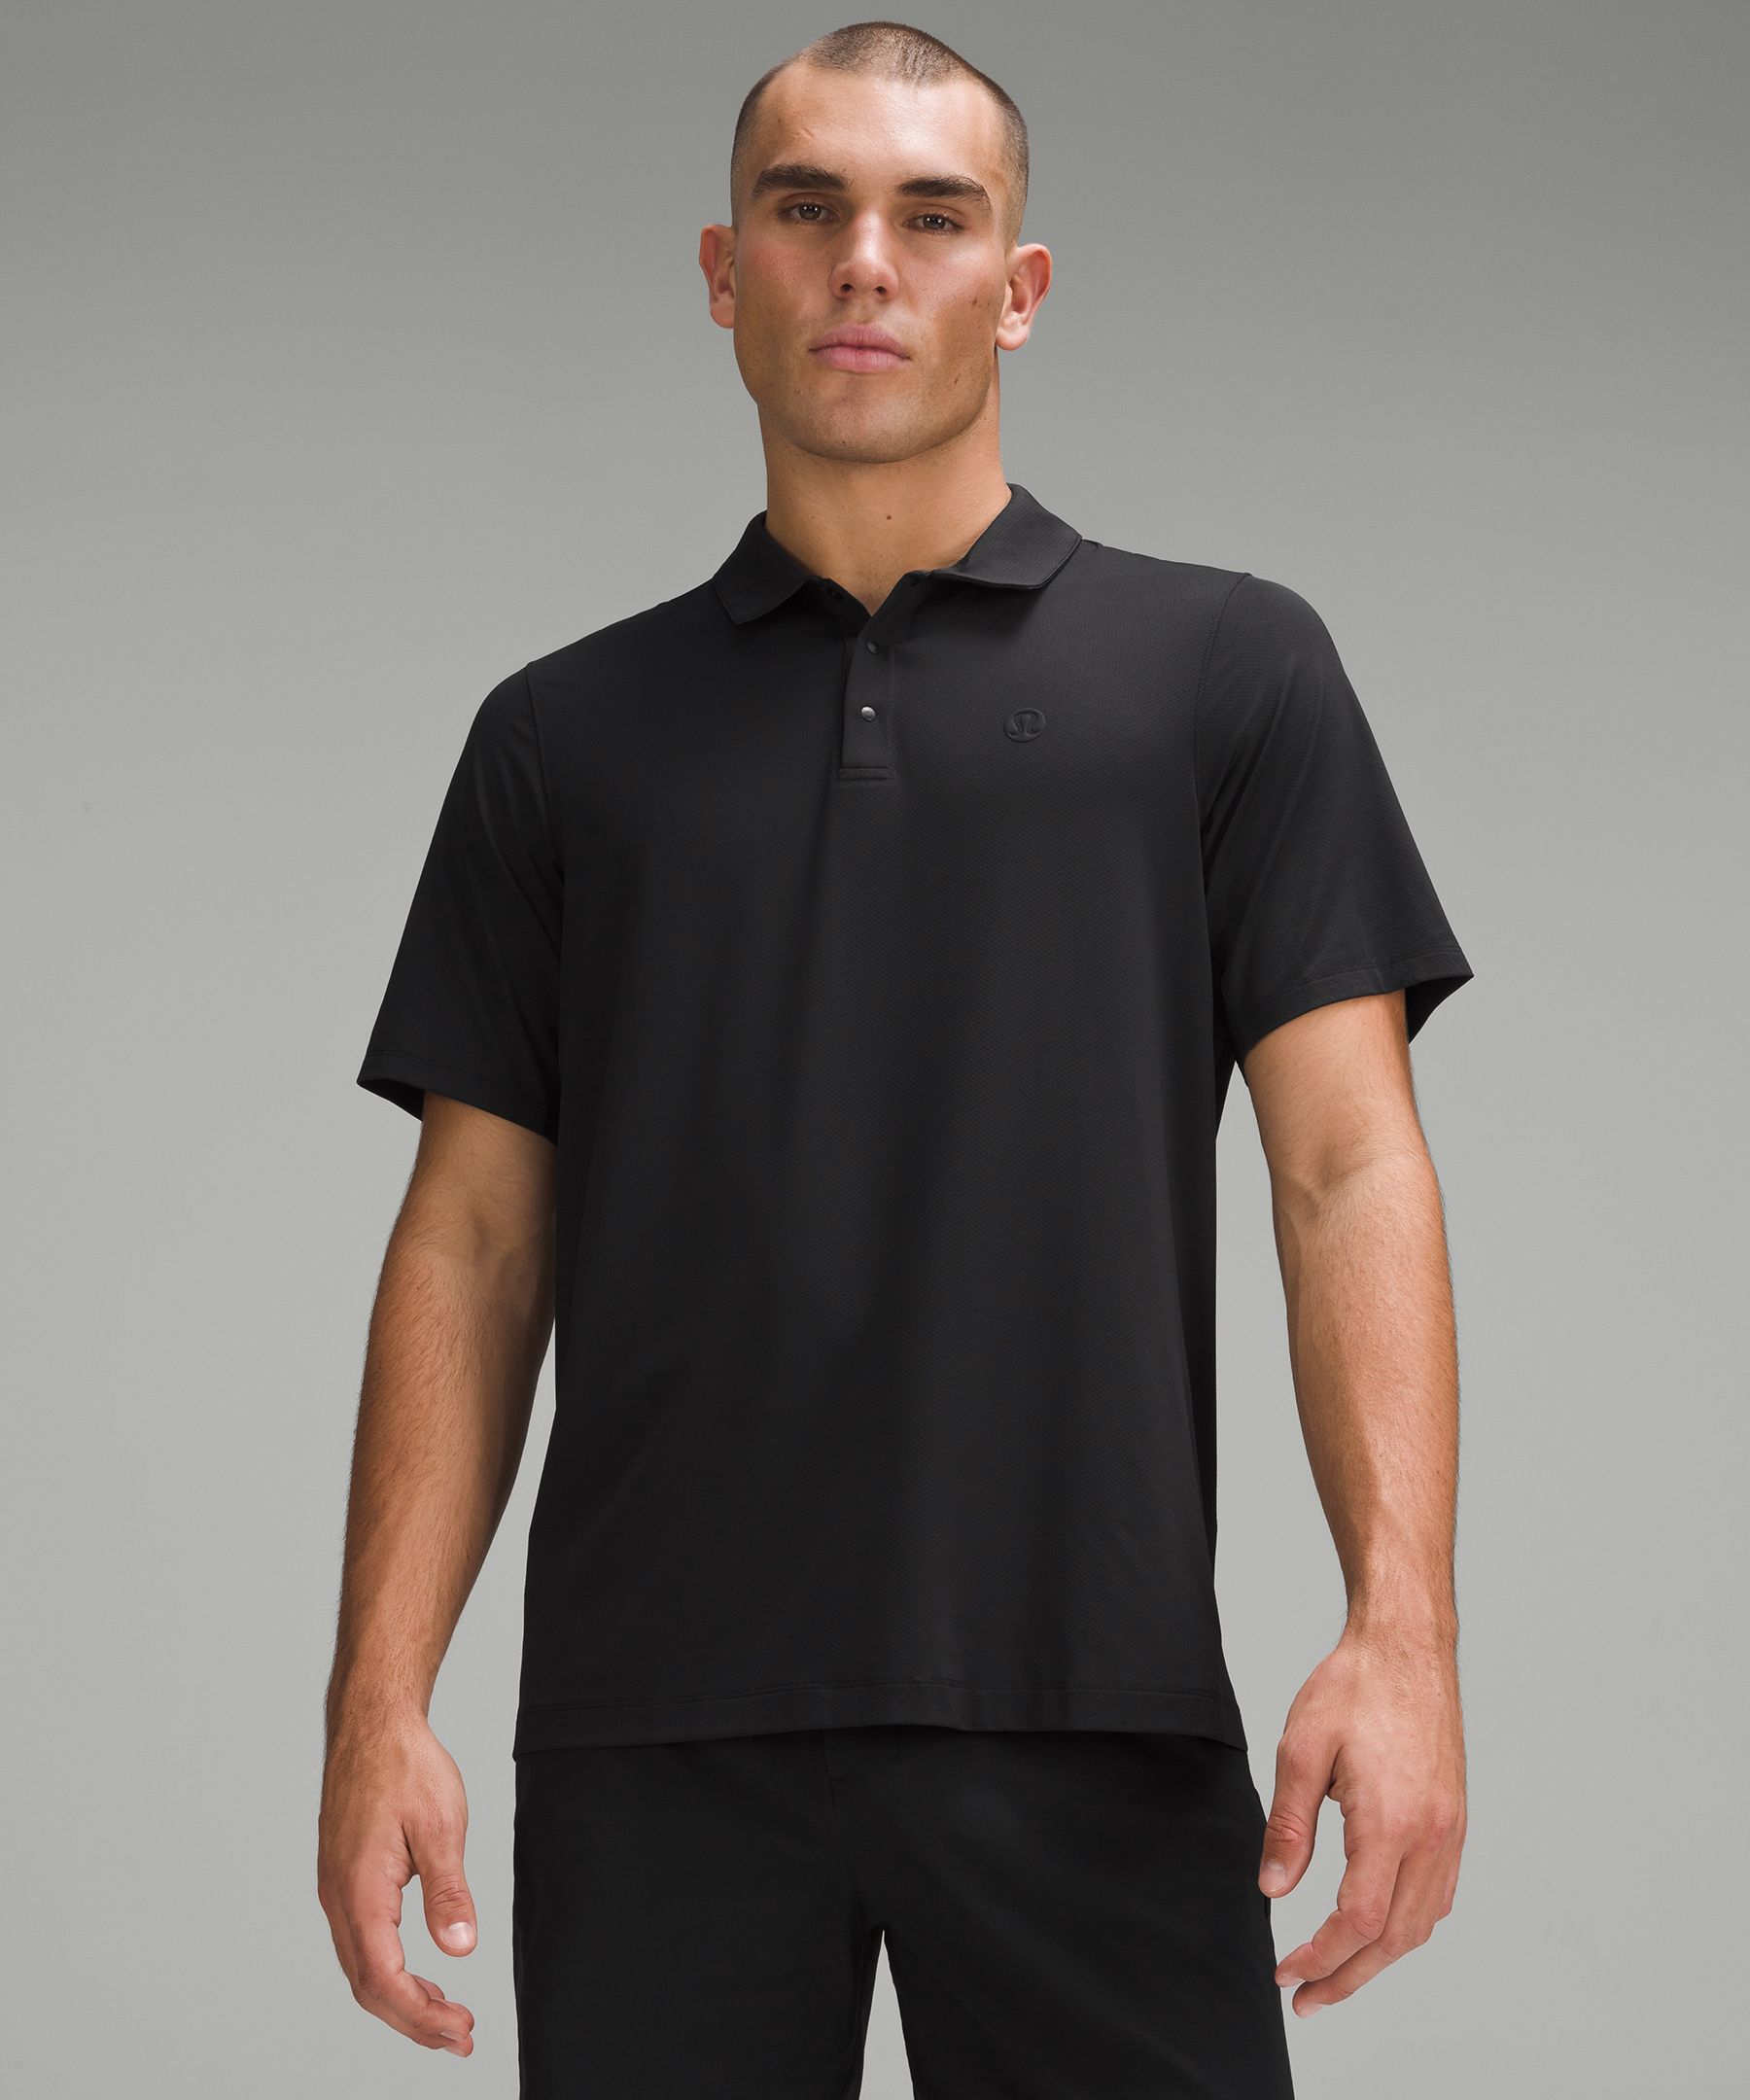 The New lululemon Golf Collection for Men 2023: Polo Shirts, Lightweight  Golf Shorts and More